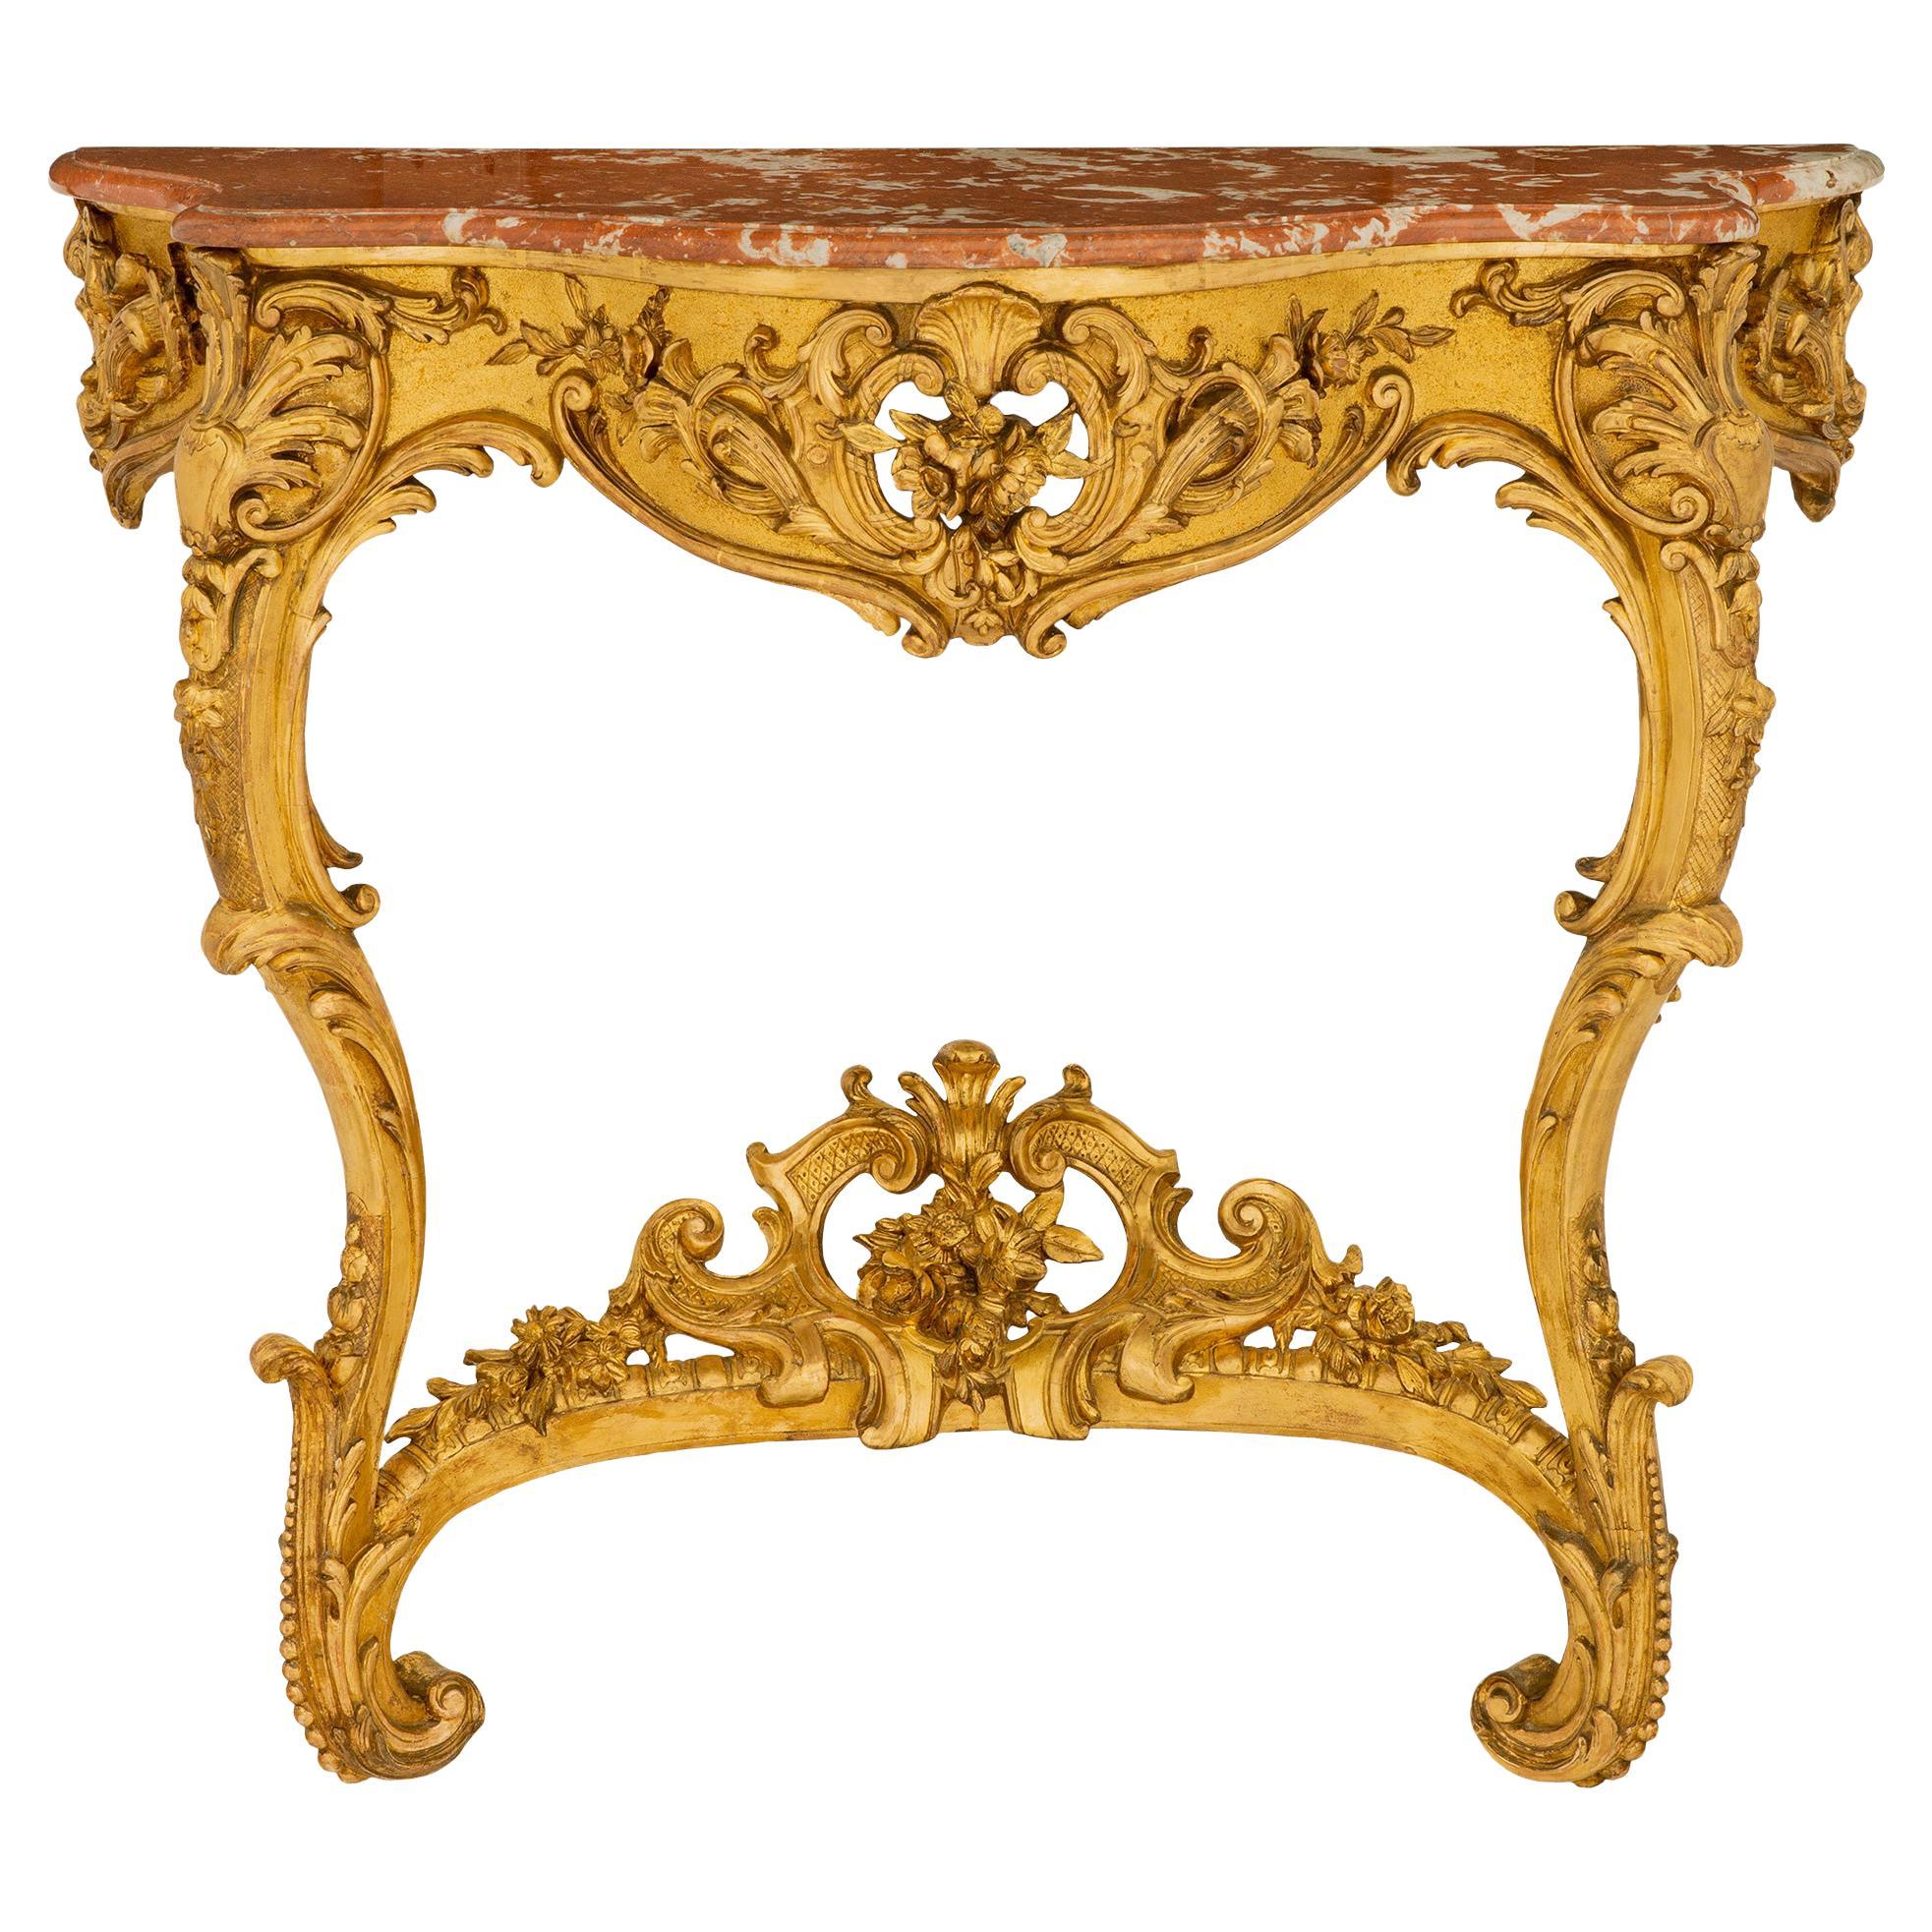 French 19th Century Louis XV Style Giltwood and Marble Wall-Mounted Console